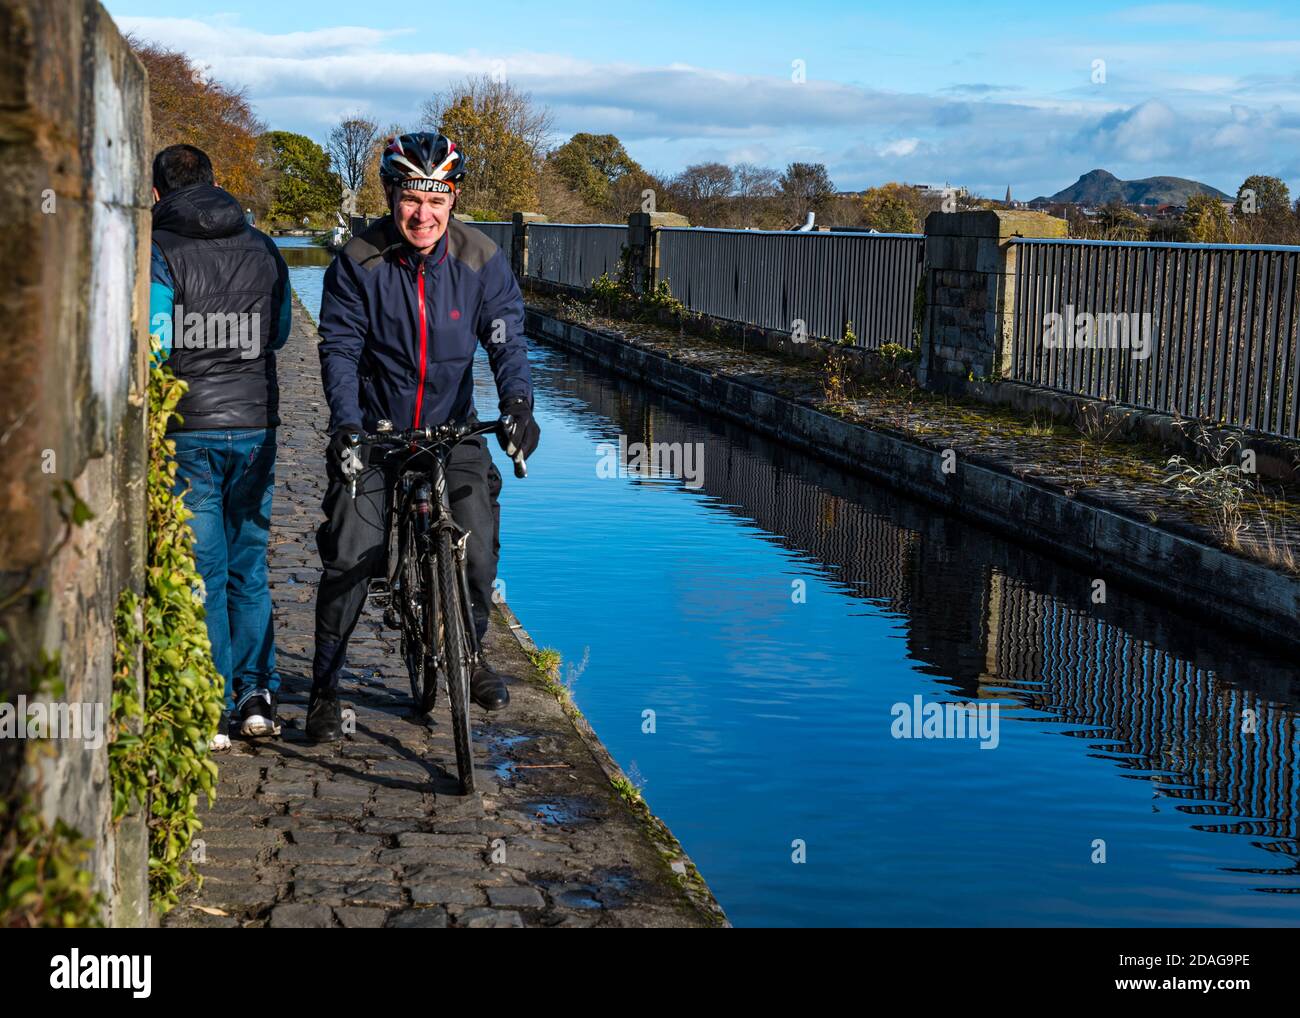 Man cycling across narrow towpath on Slateford Aqueduct into the path of a walker or pedestrian during pandemic, Union Canal, Edinburgh, Scotland, UK Stock Photo